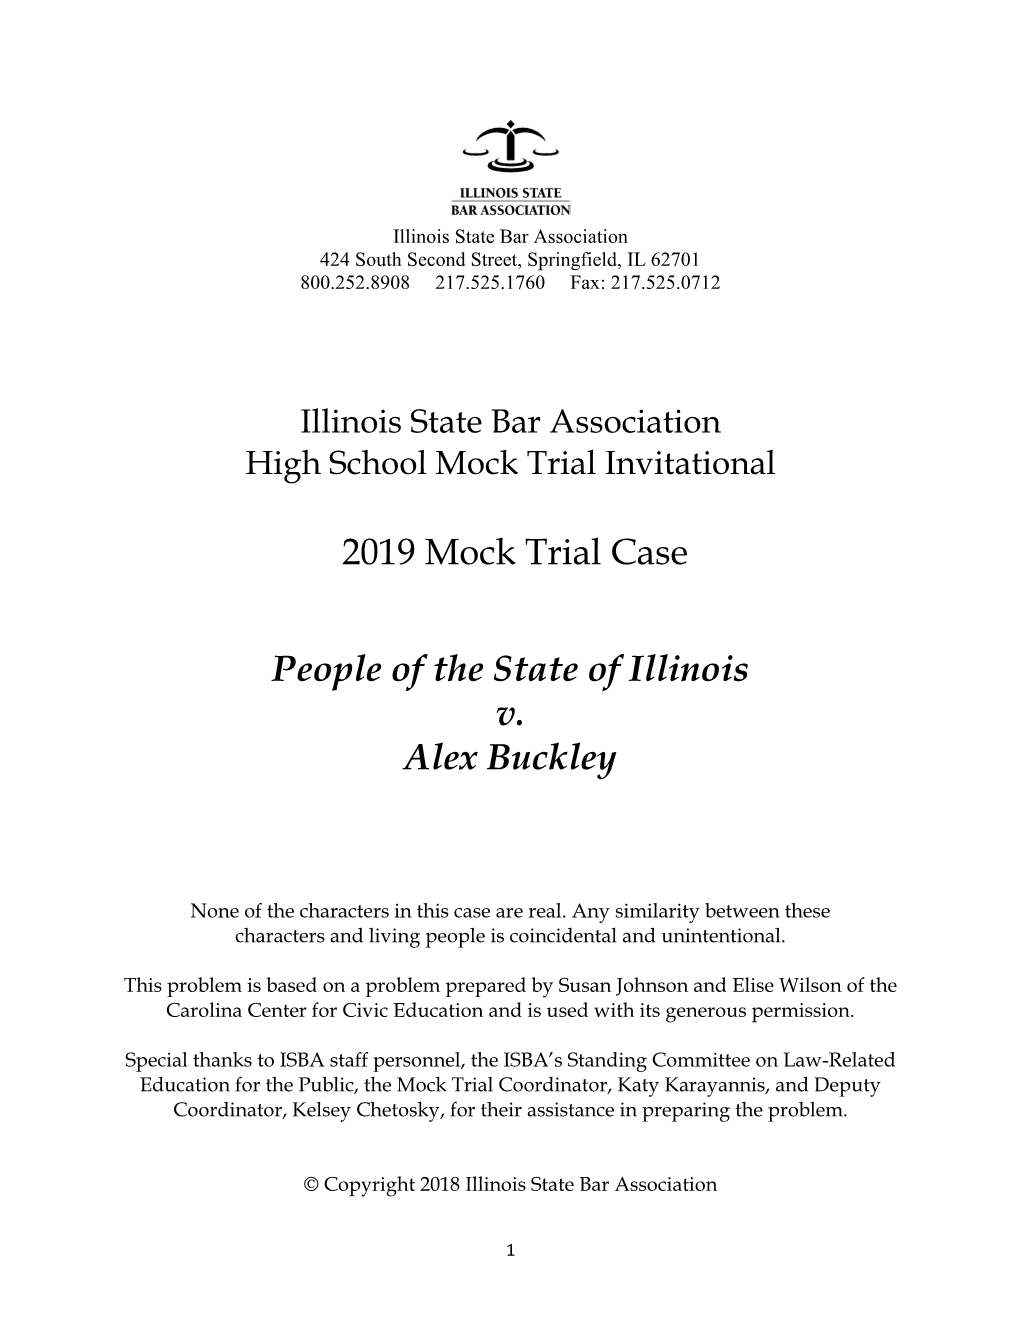 2019 Mock Trial Case People of the State of Illinois V. Alex Buckley